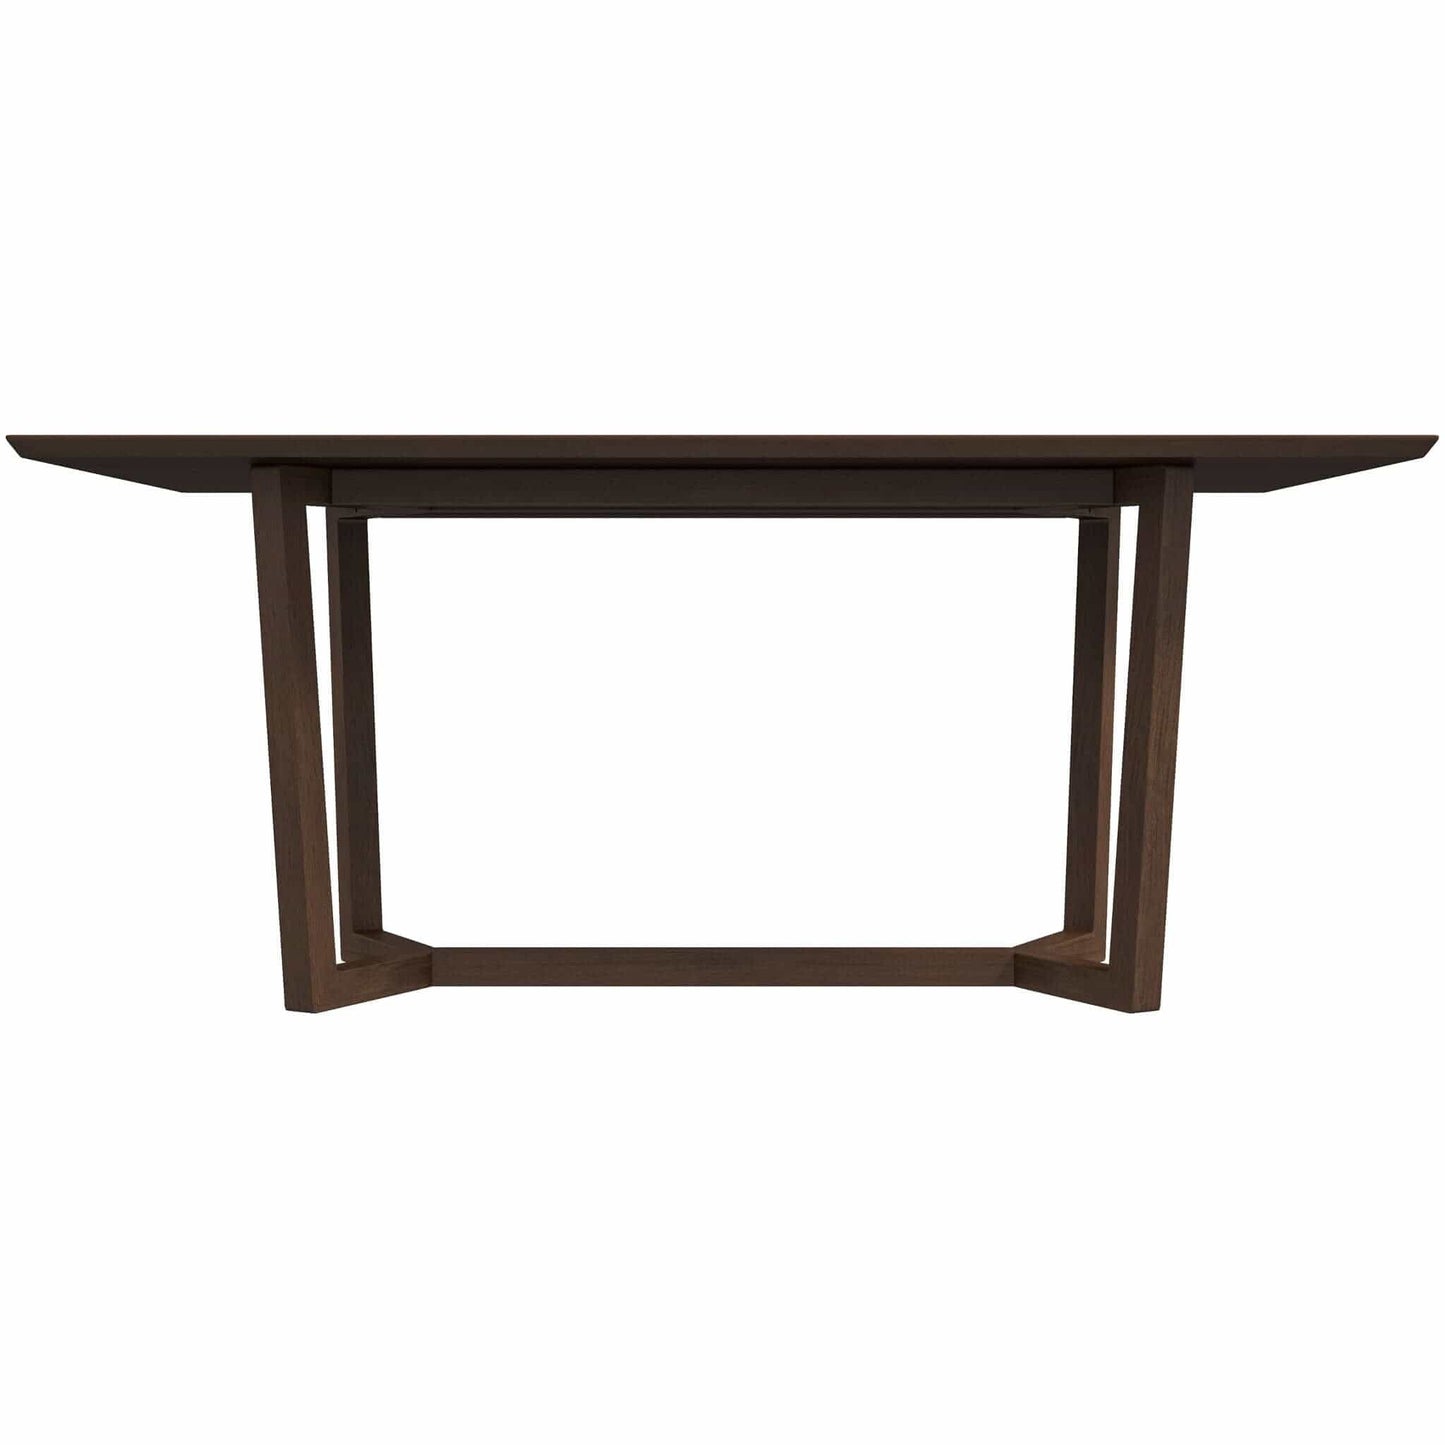 The Carpentry Shop Co. Dining Tables Jenny Mid-Century Modern Solid Wood Dining Table in Walnut